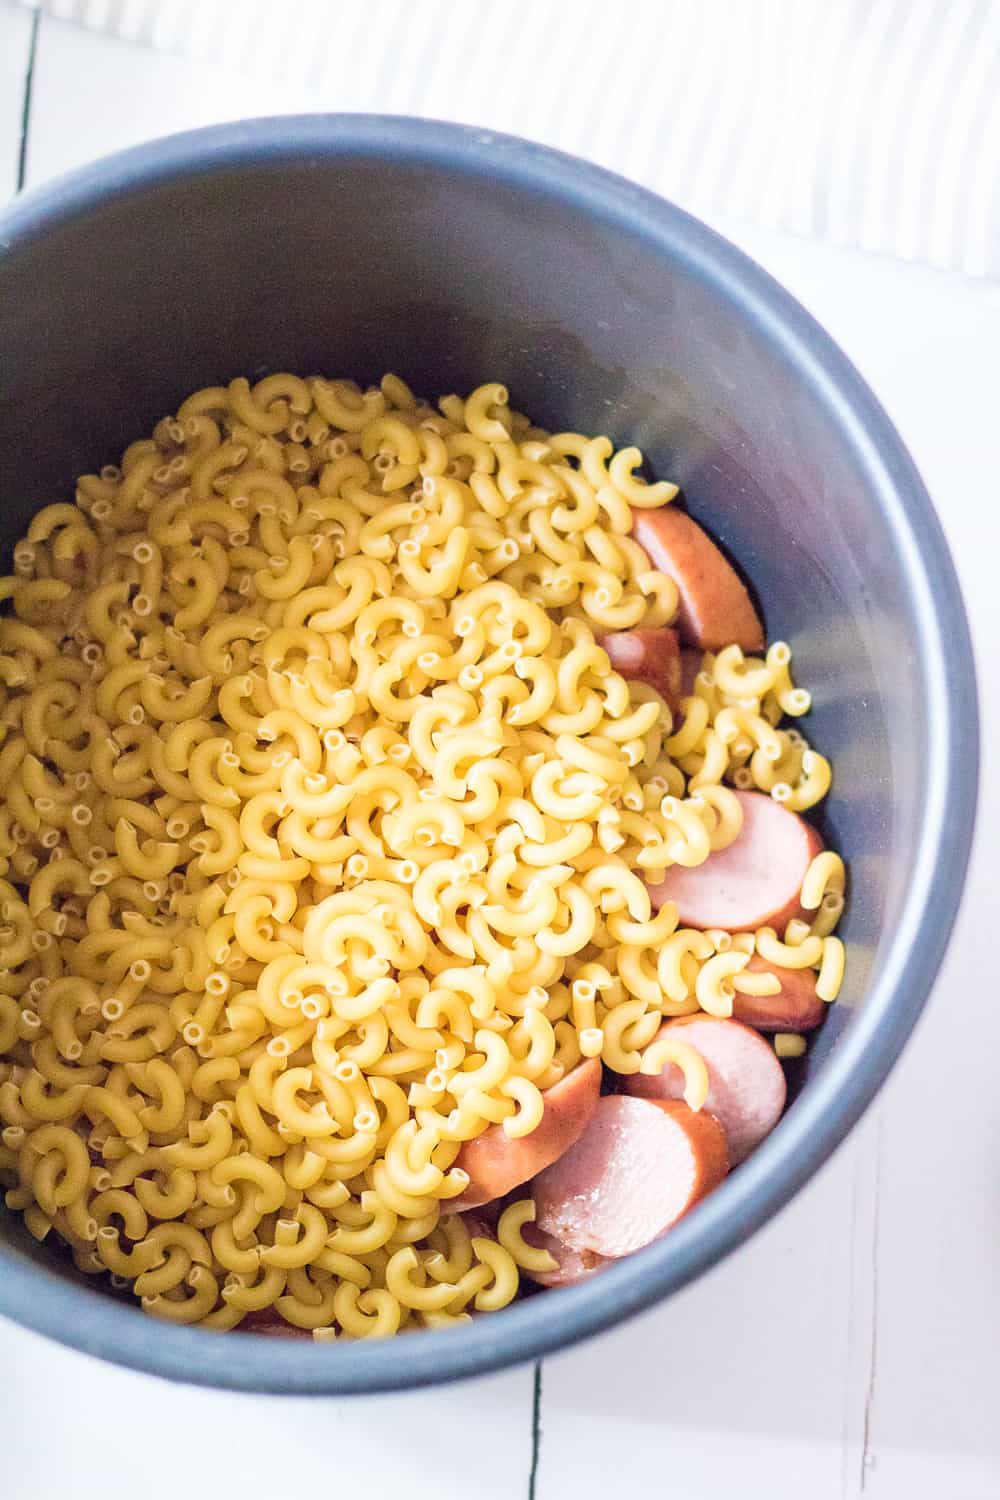 macaroni noodles and sliced sausage in the bowl of an electric pressure cooker.